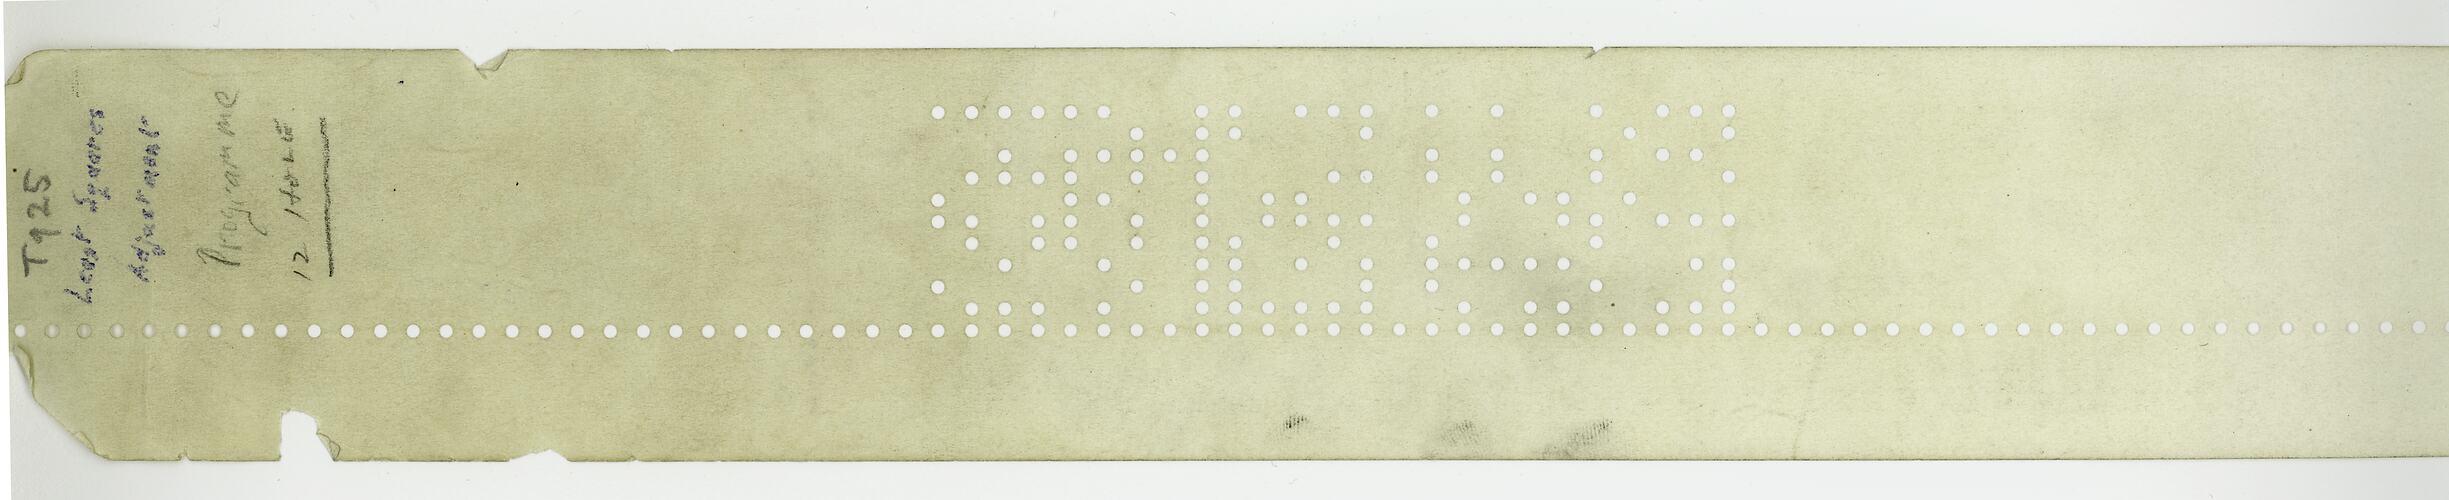 Rectangular paper card with text and punched holes.